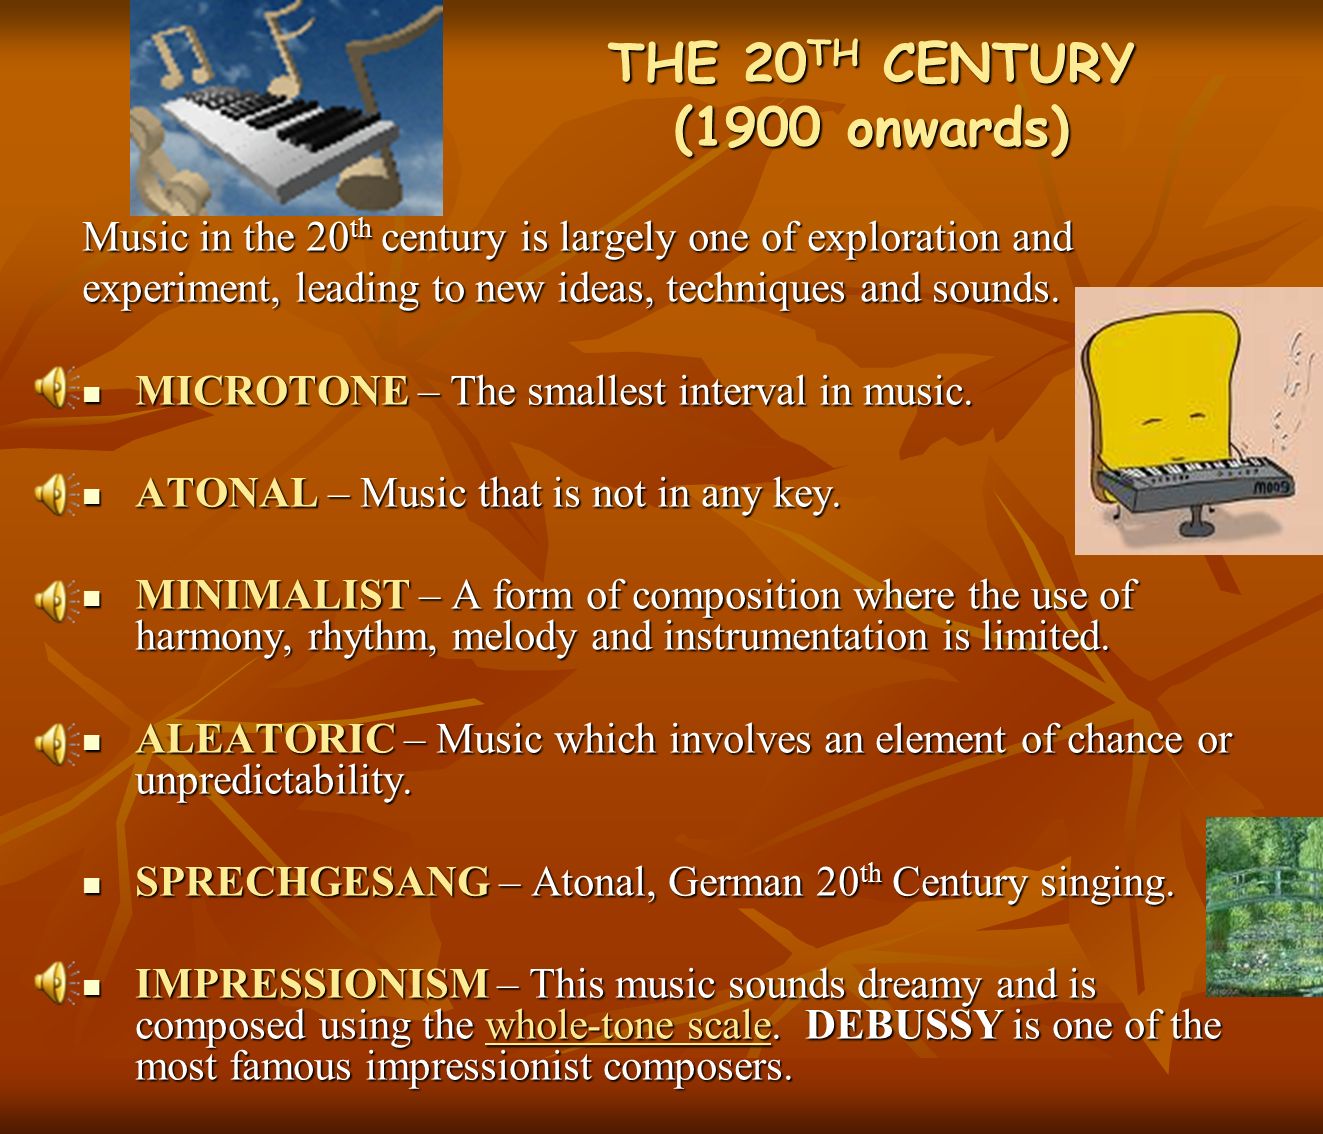 THE 20 TH CENTURY (1900 onwards) Music in the 20 th century is largely one of exploration and experiment, leading to new ideas, techniques and sounds.